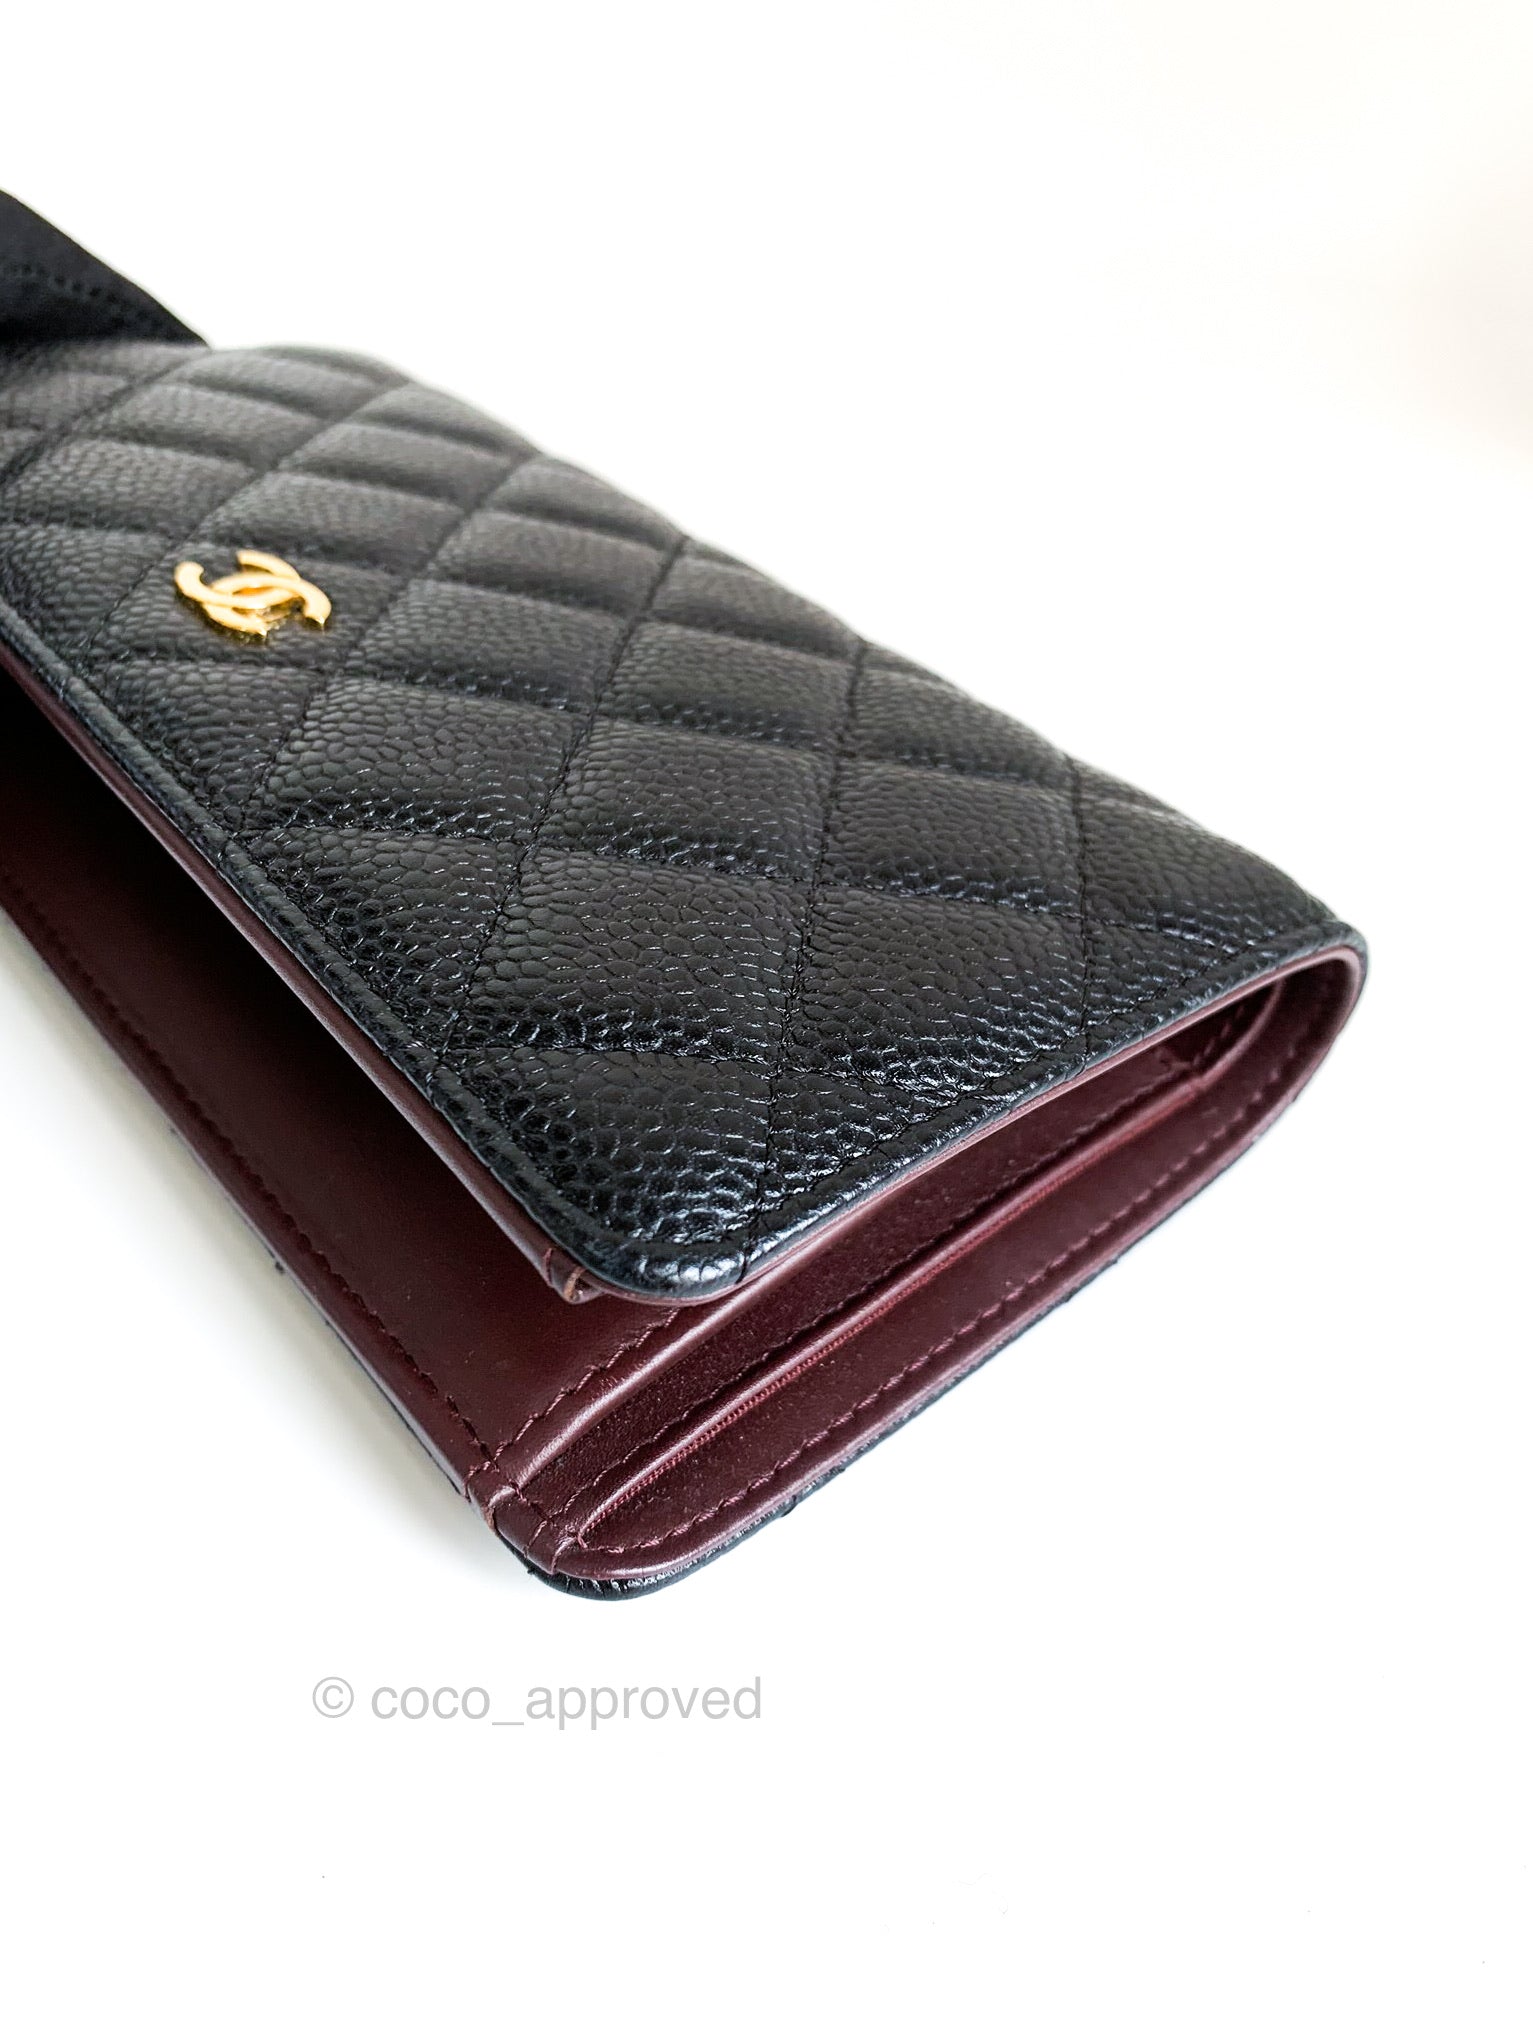 CHANEL A31509 BLACK CAVIAR LEATHER QUILTED YEN LONG WALLET